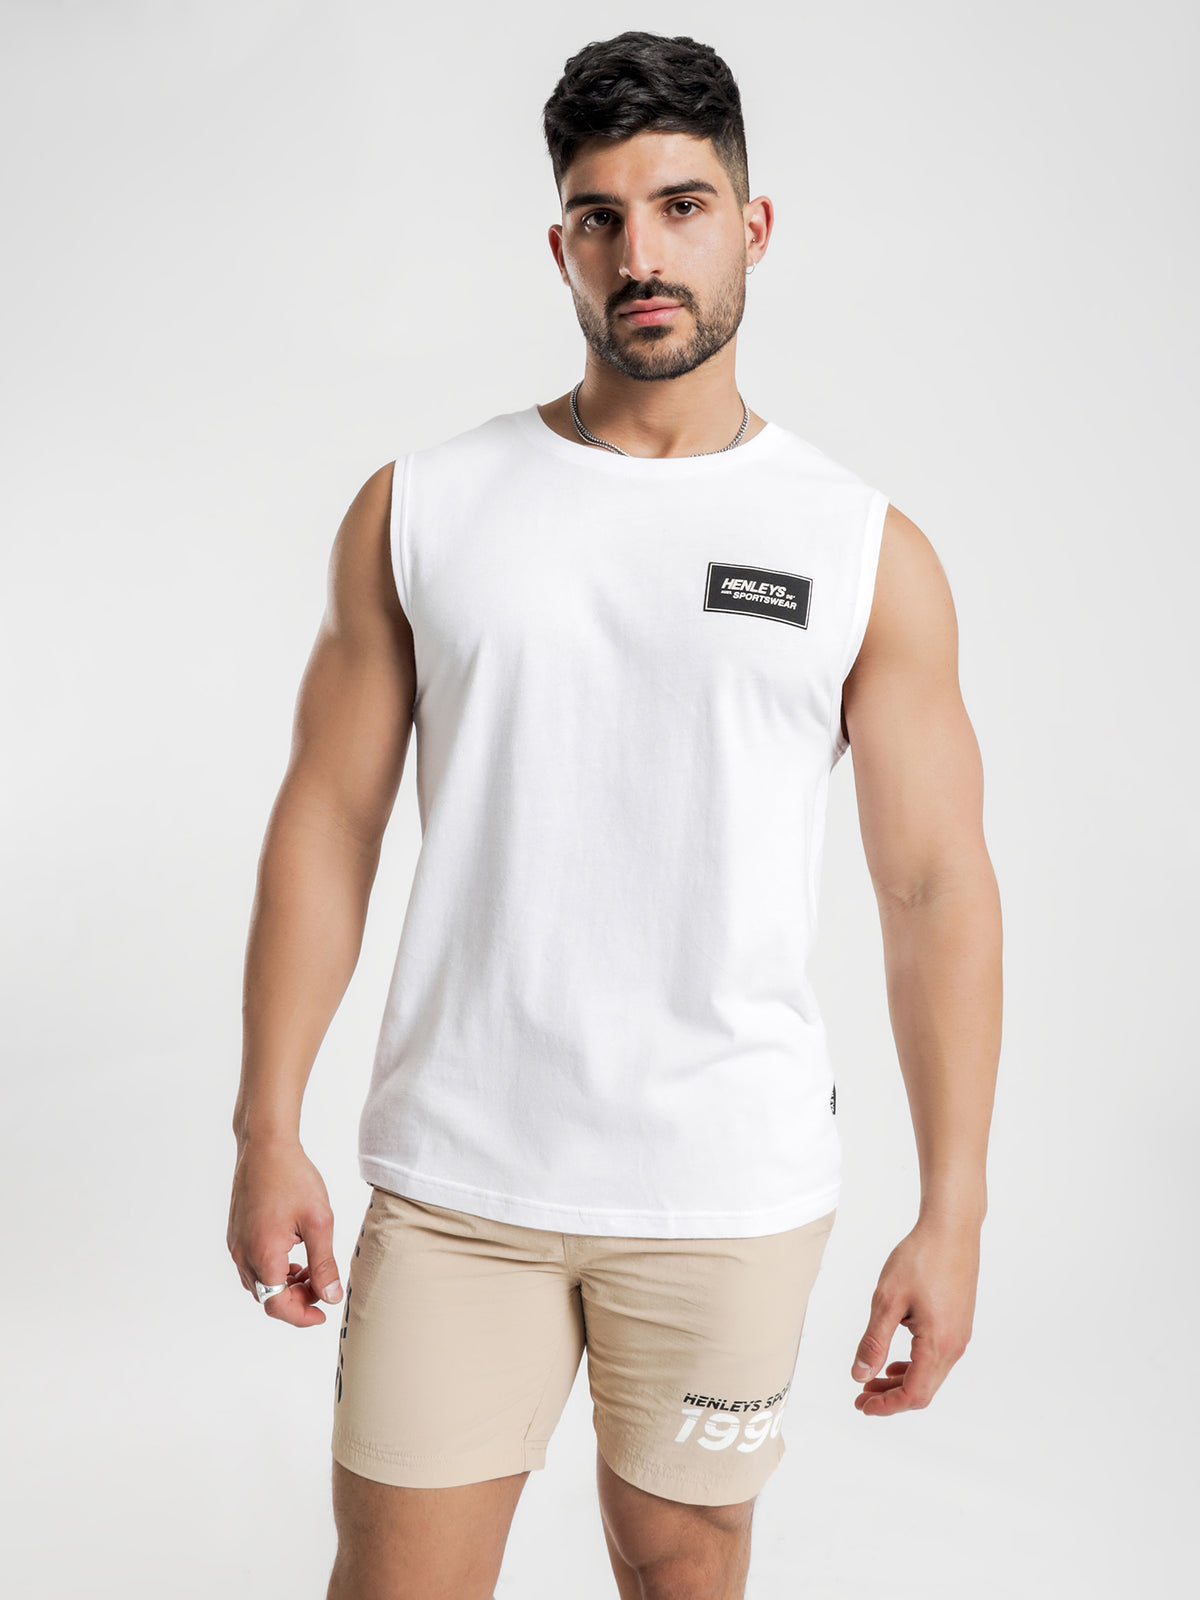 Team Muscle T-Shirt in White